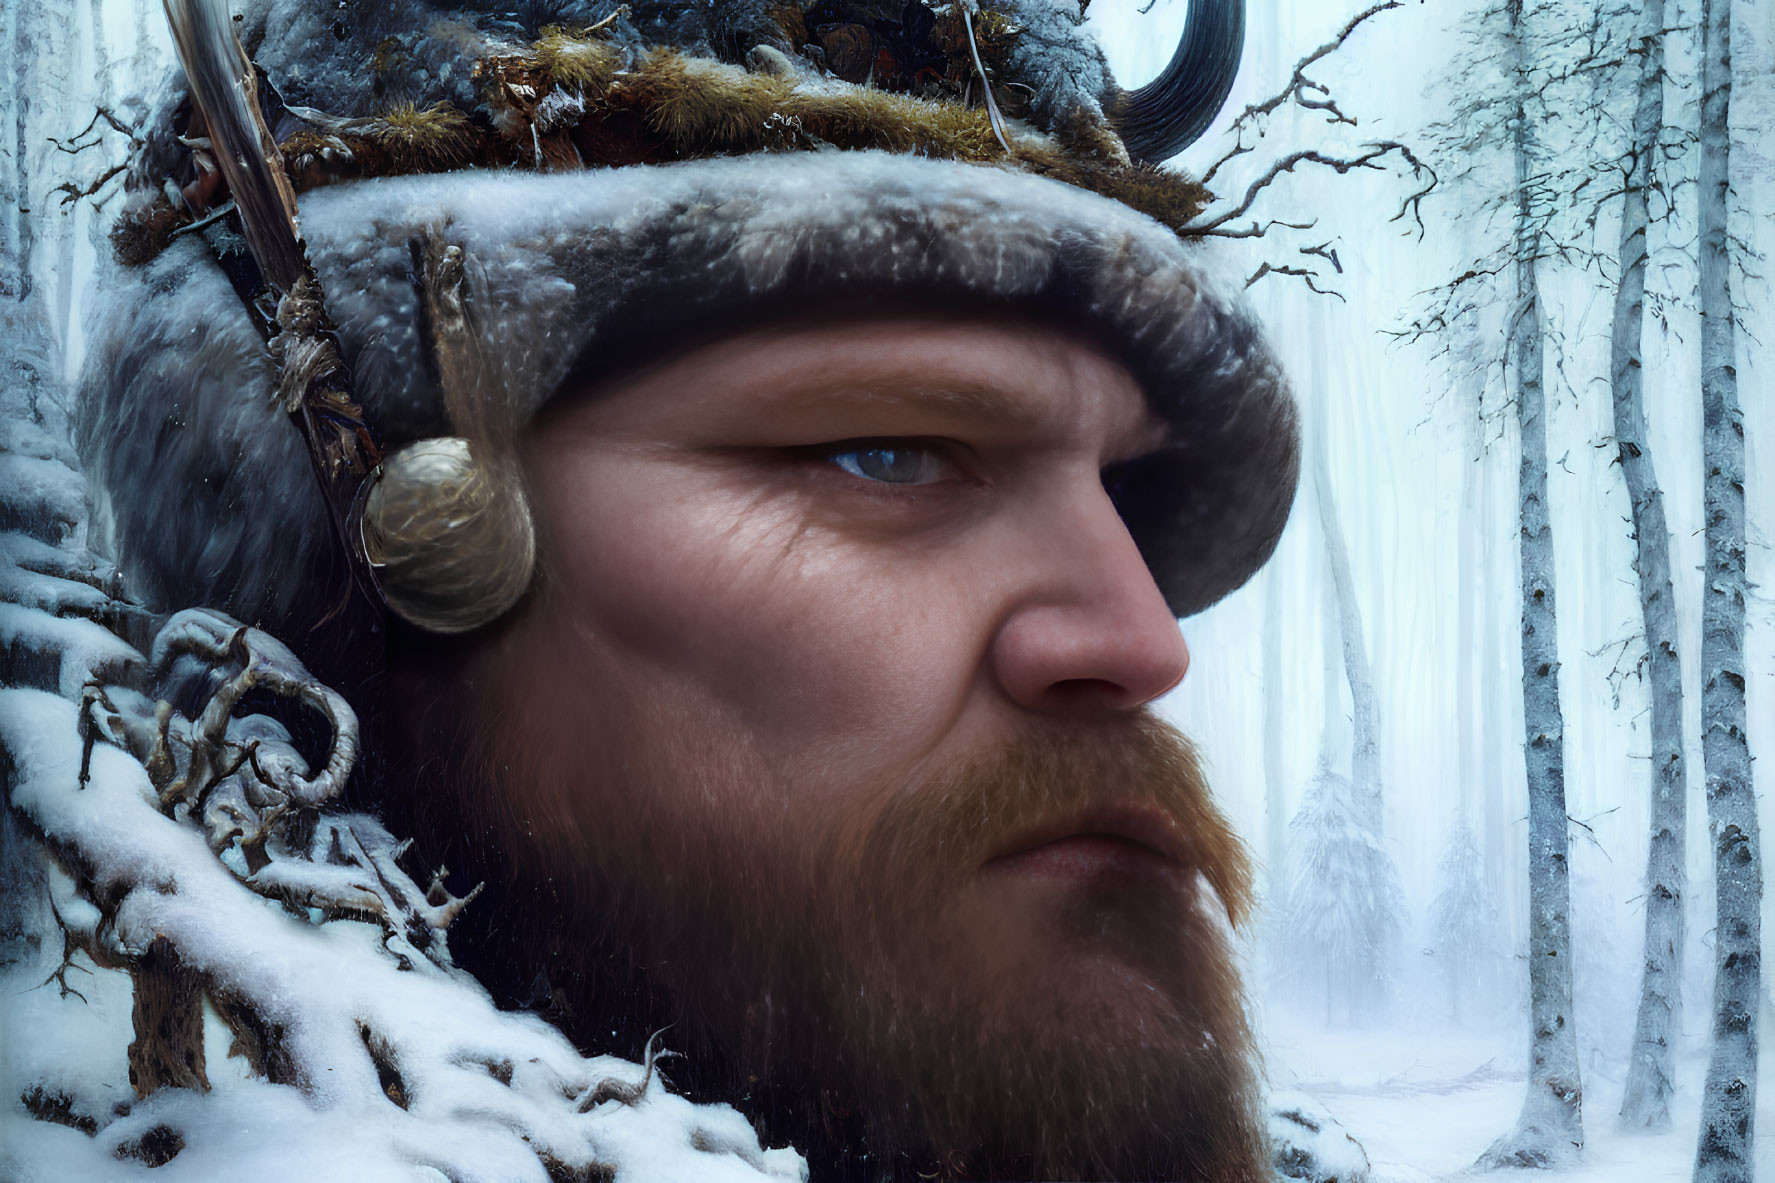 Bearded individual in fur clothing and horned helmet in snowy forest